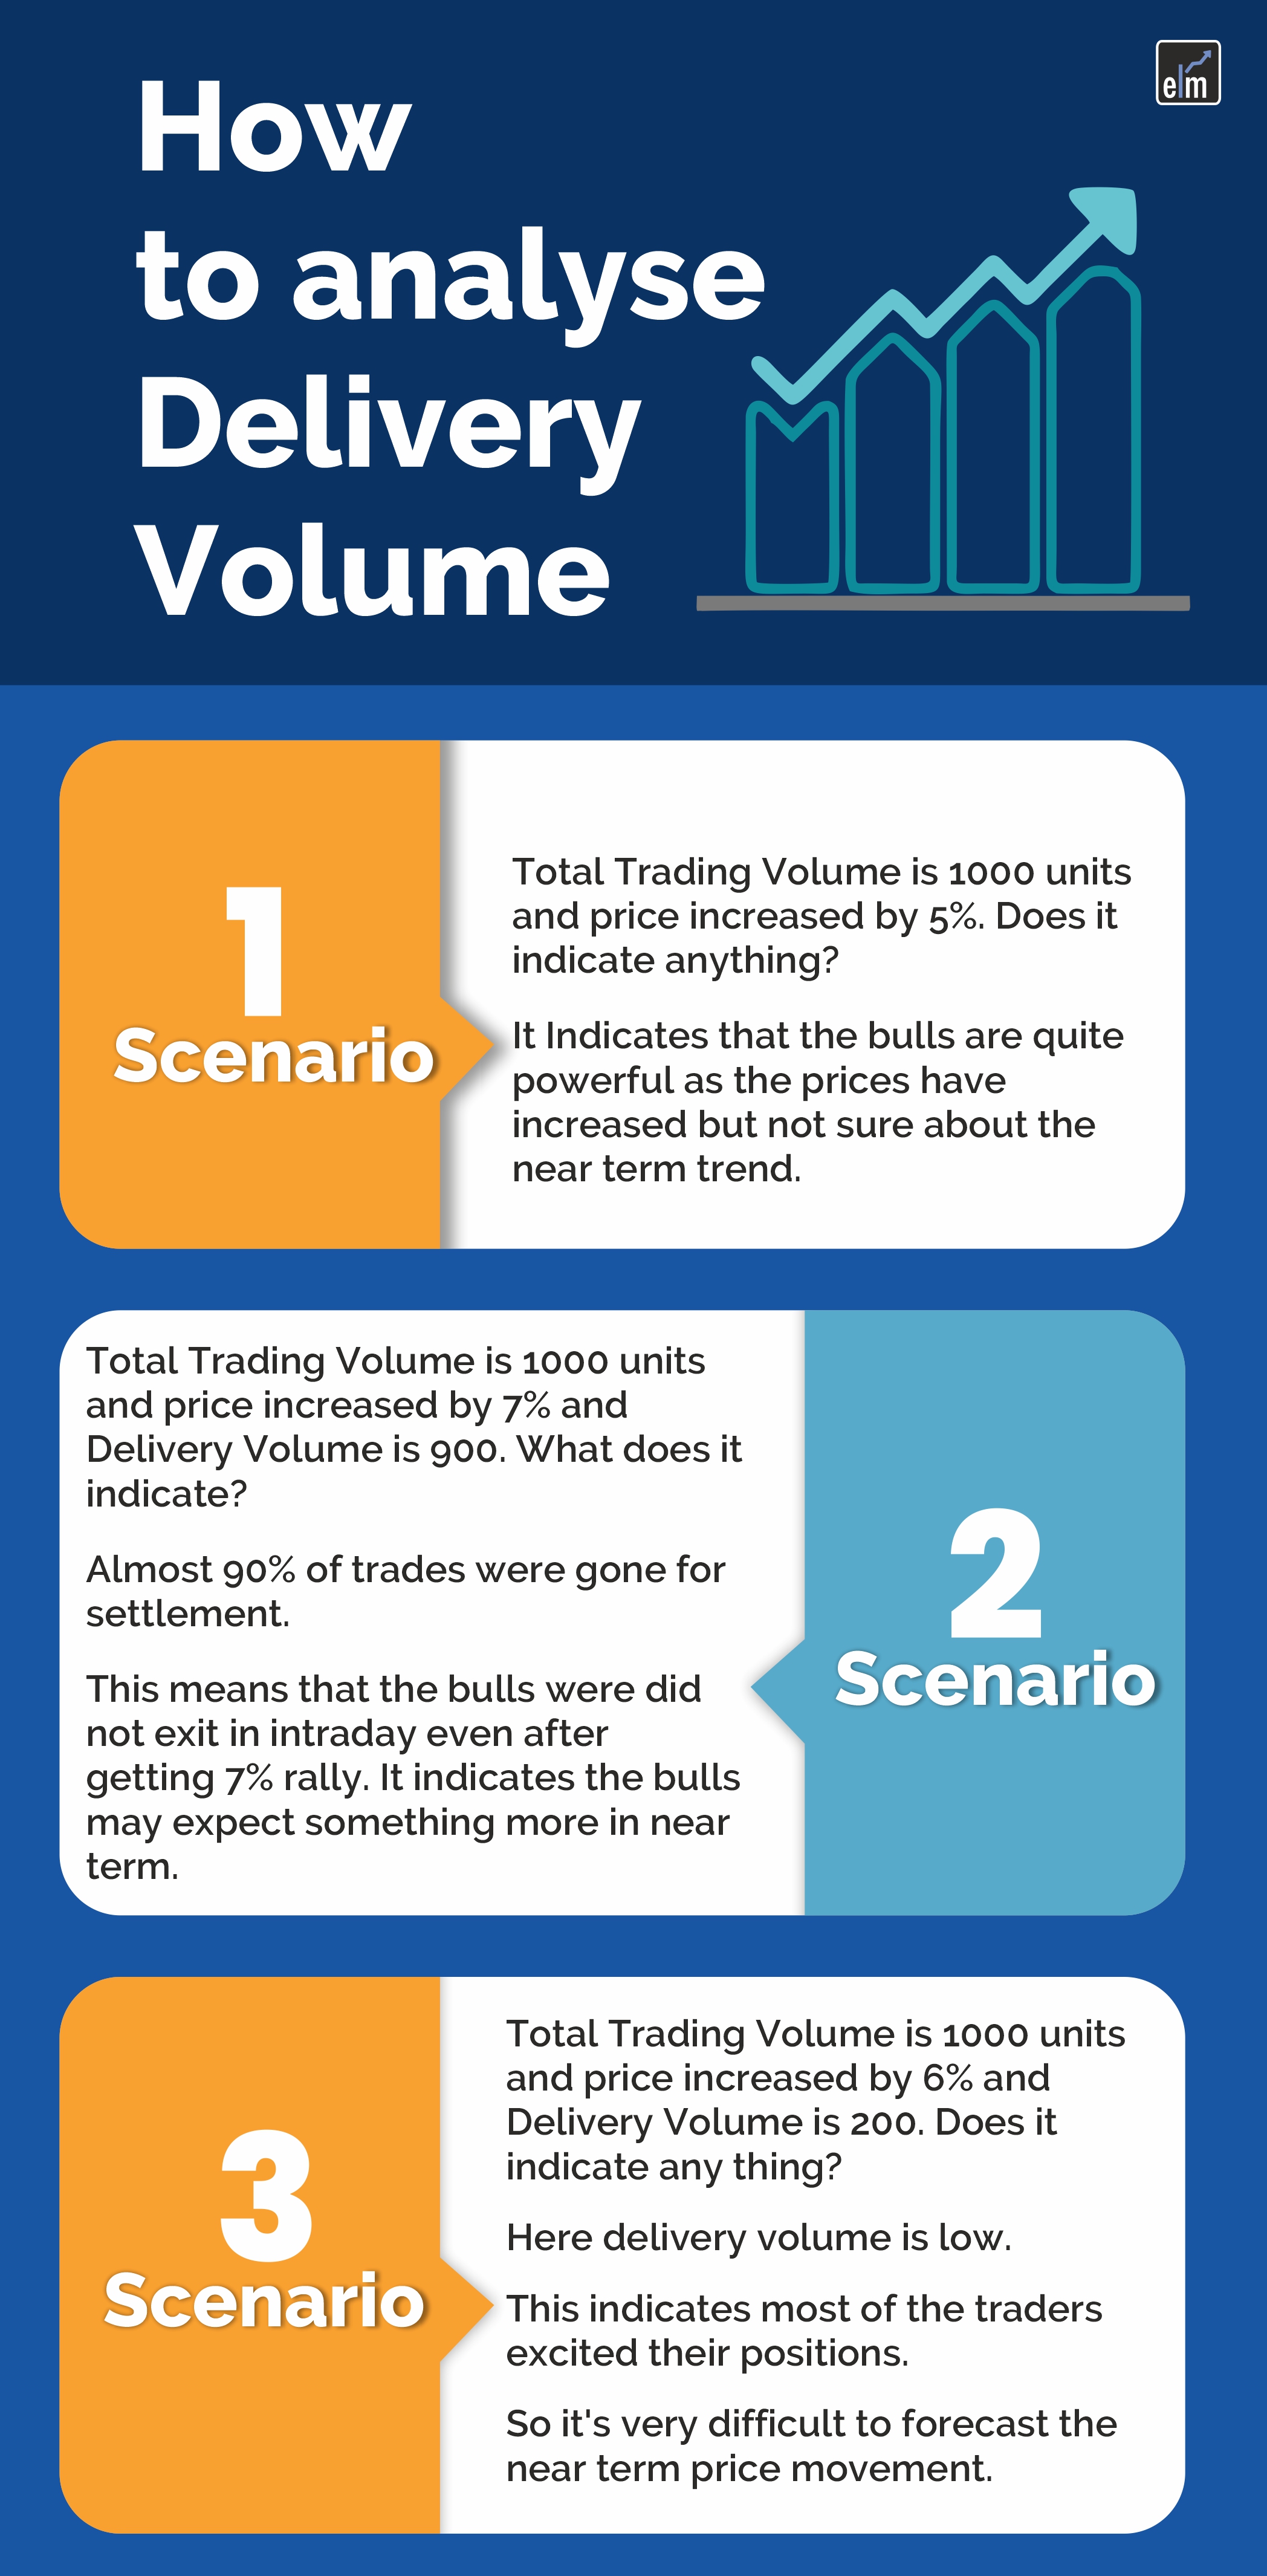 Difference between Volume Traded and Volume Delivery 2